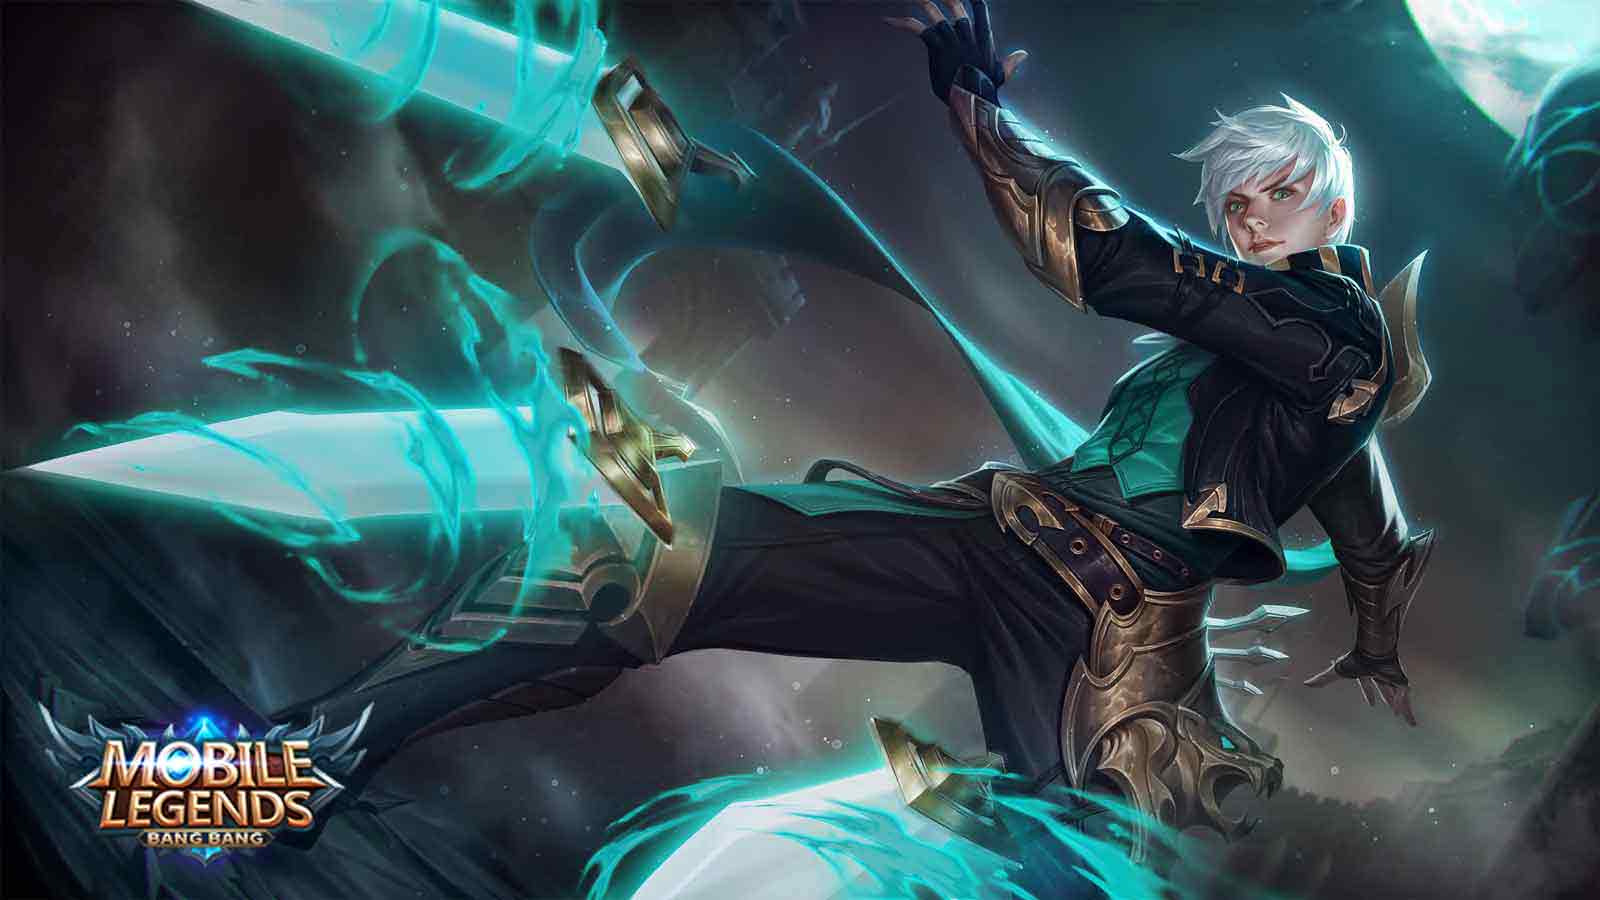 Links and How to Get Mobile Legends HD Wallpapers!